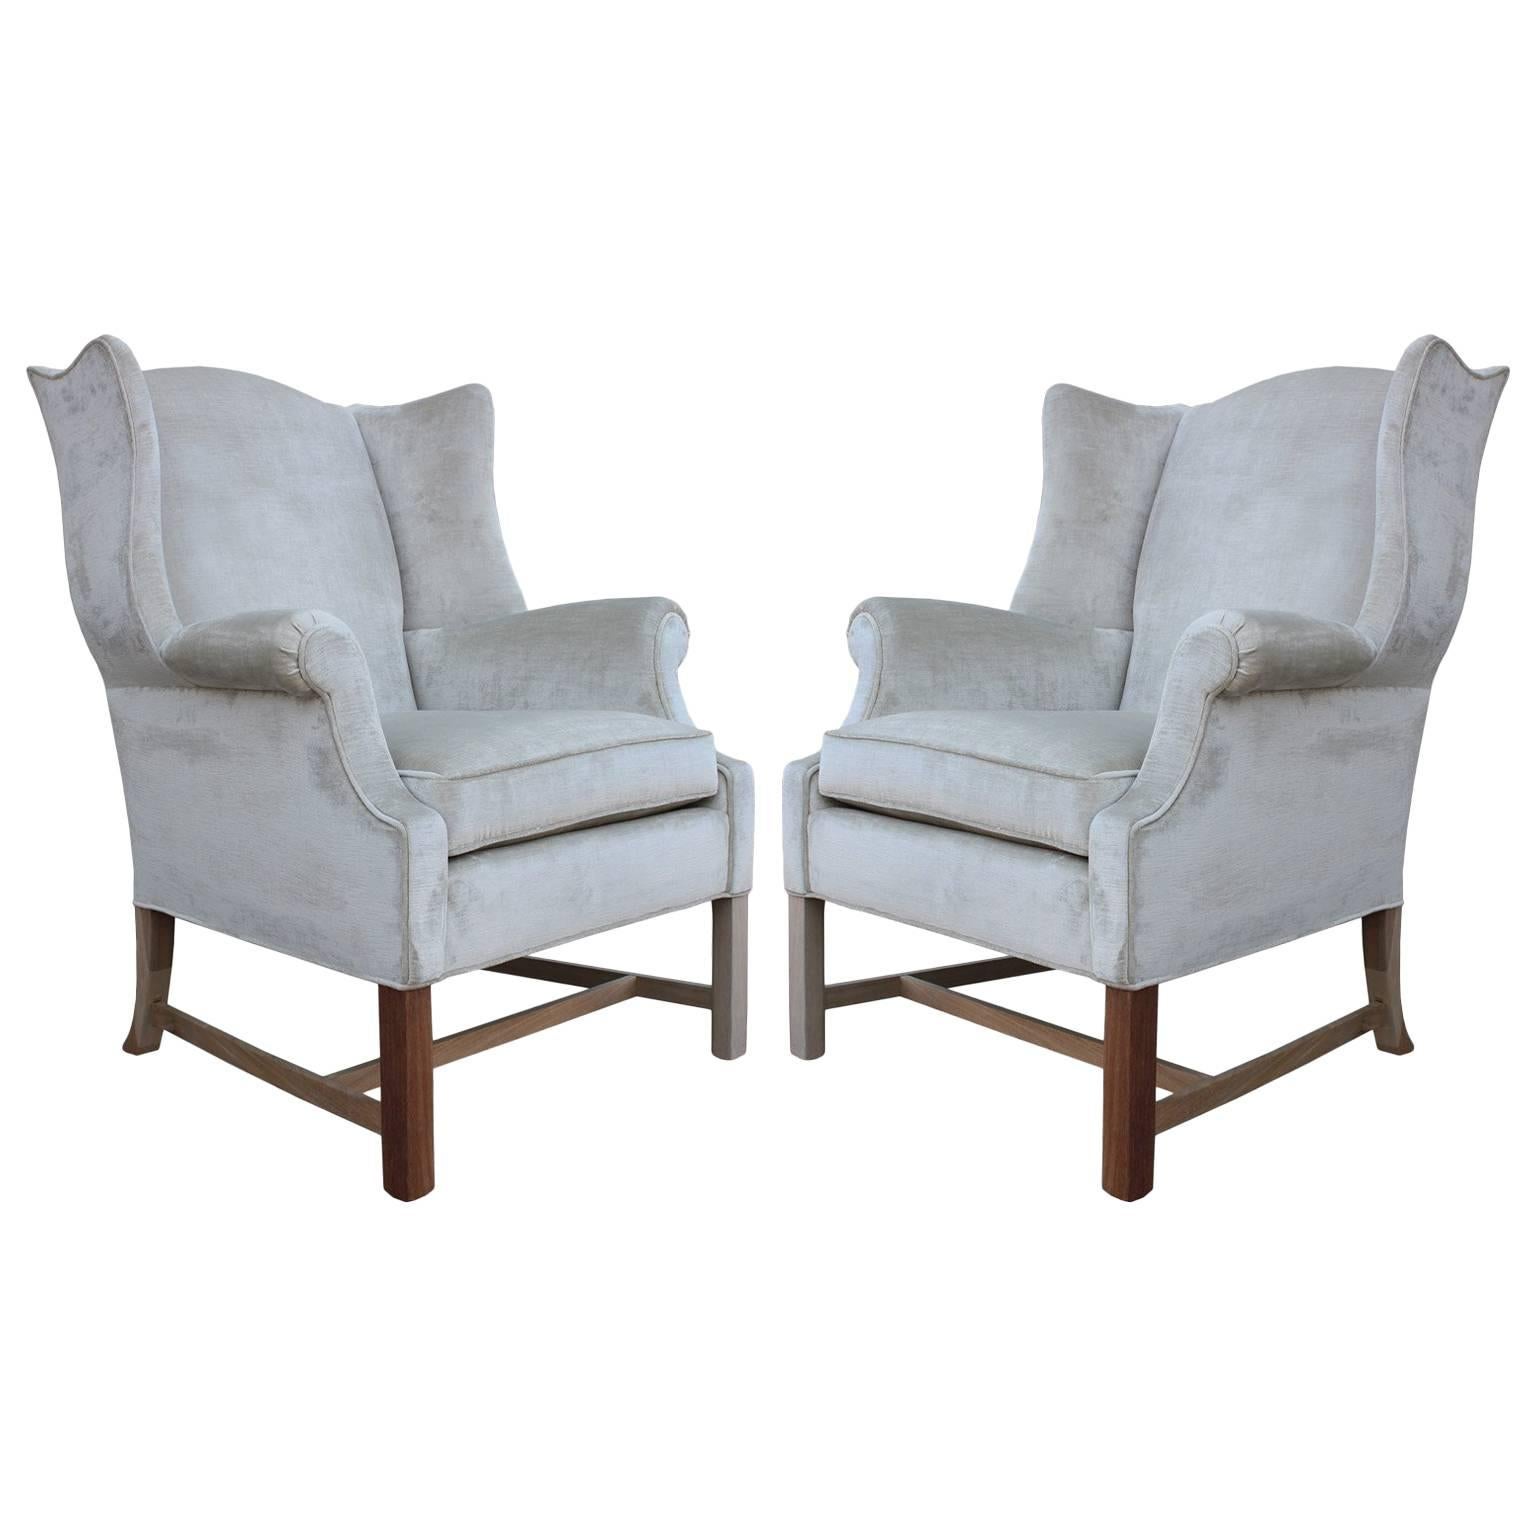 Pair of Modern Sculptural Wingback Lounge Chairs in Grey Silver Velvet